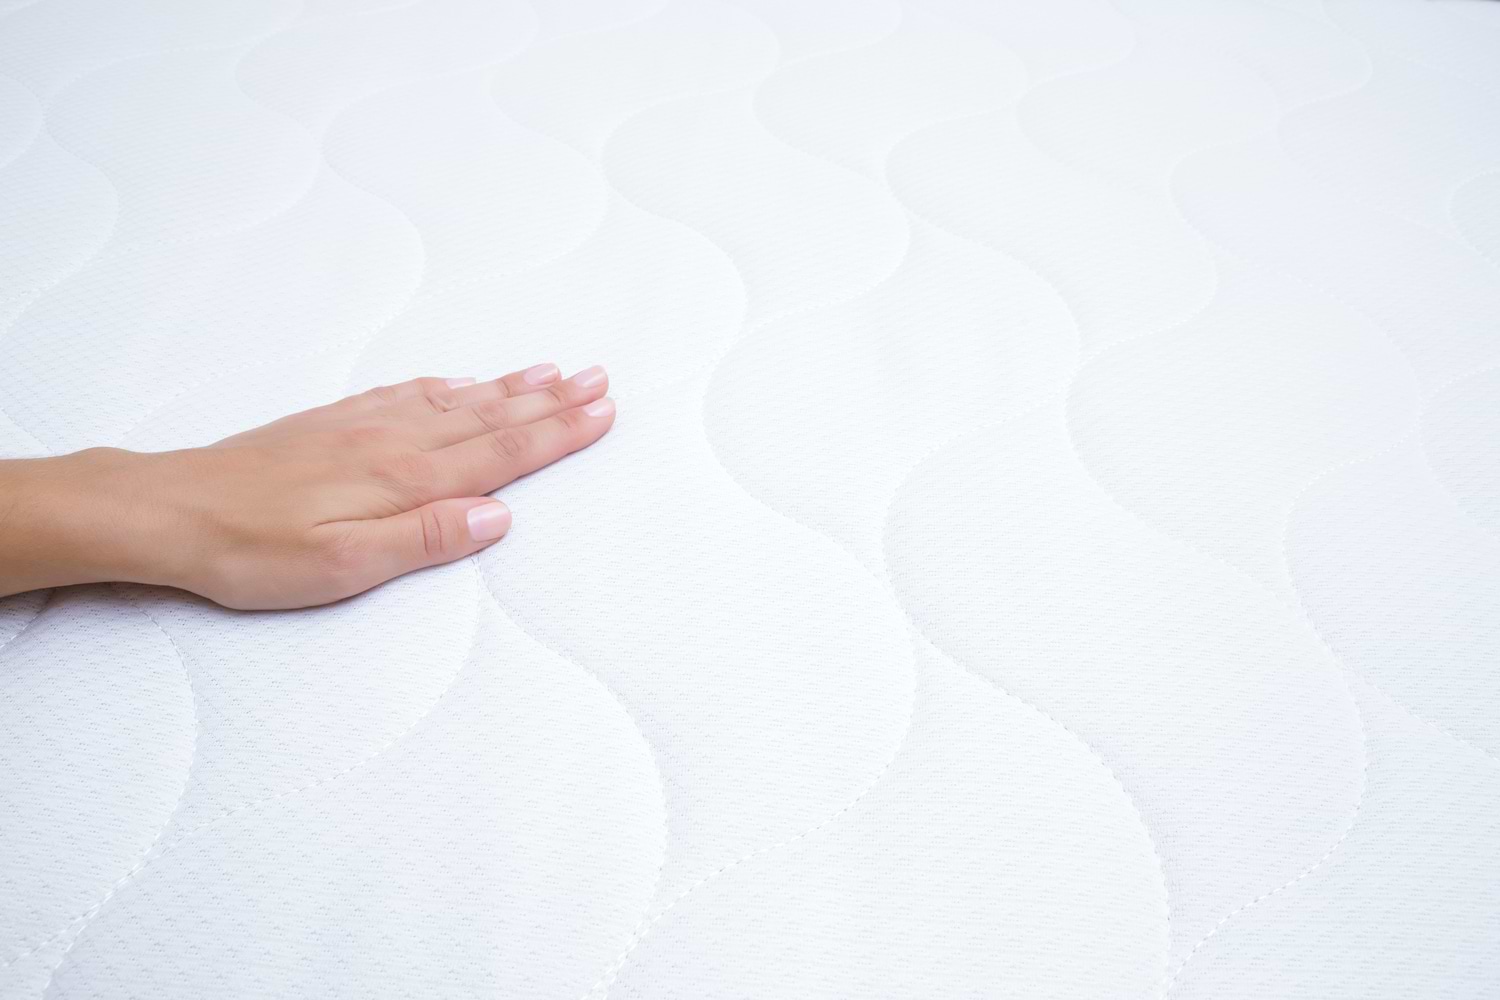 SIX-THINGS-TO-CONSIDER-WHEN-CHOOSING-THE-RIGHT-MATTRESS